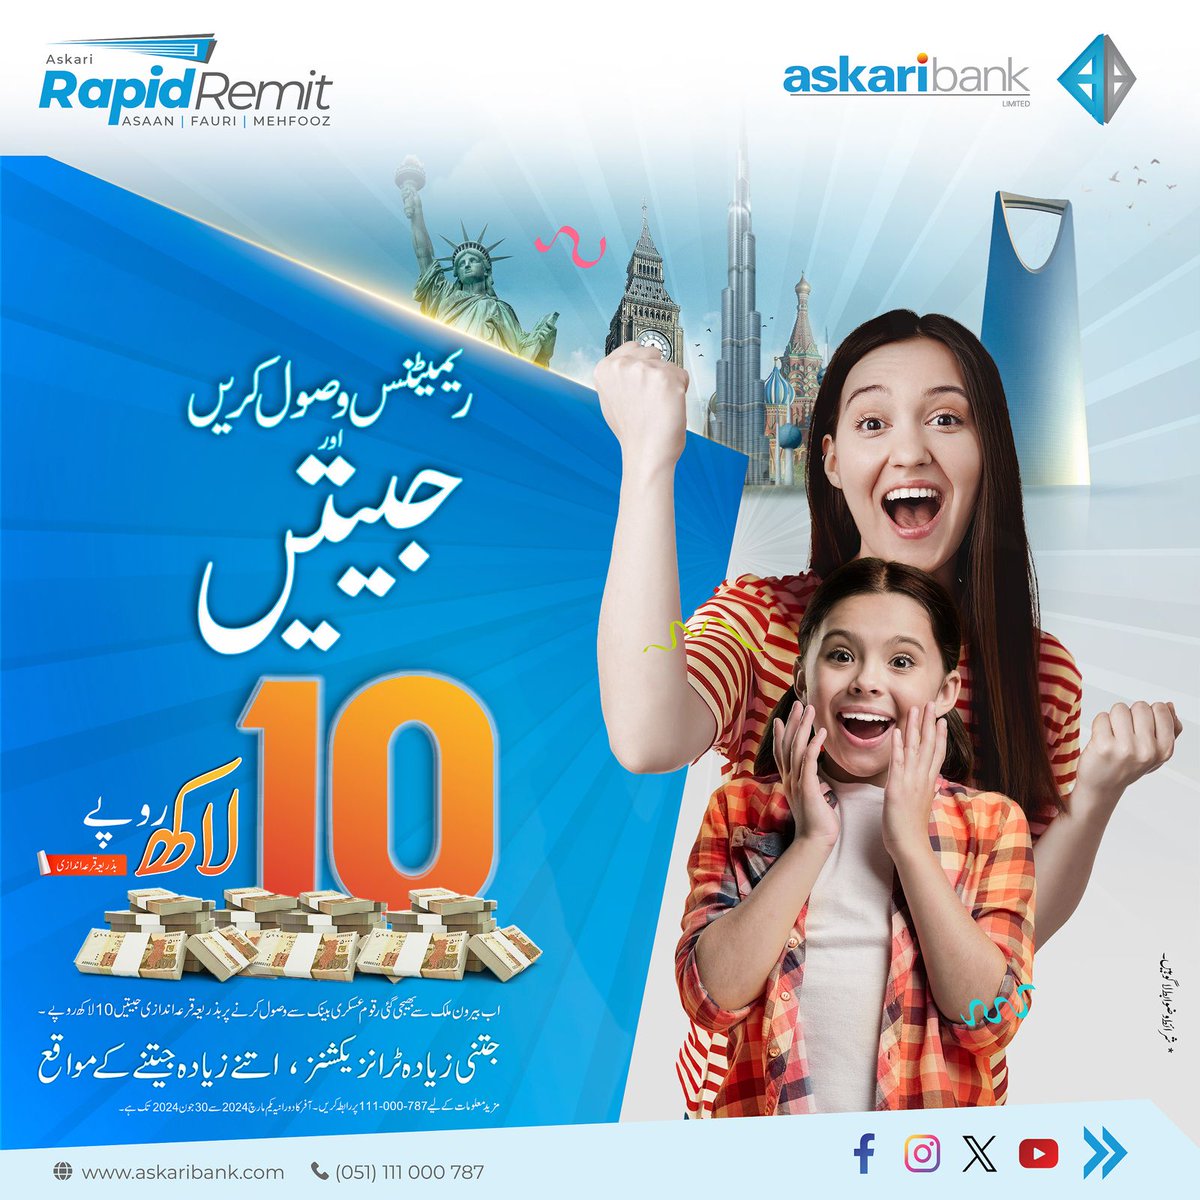 Win PKR 10 Lakhs with every remittance! Now receive your money from abroad through Askari Bank and win this BIG prize! More transactions, more chances of winning! #AskariBank #Remittance #WinBig #everytransactioncounts #pkr